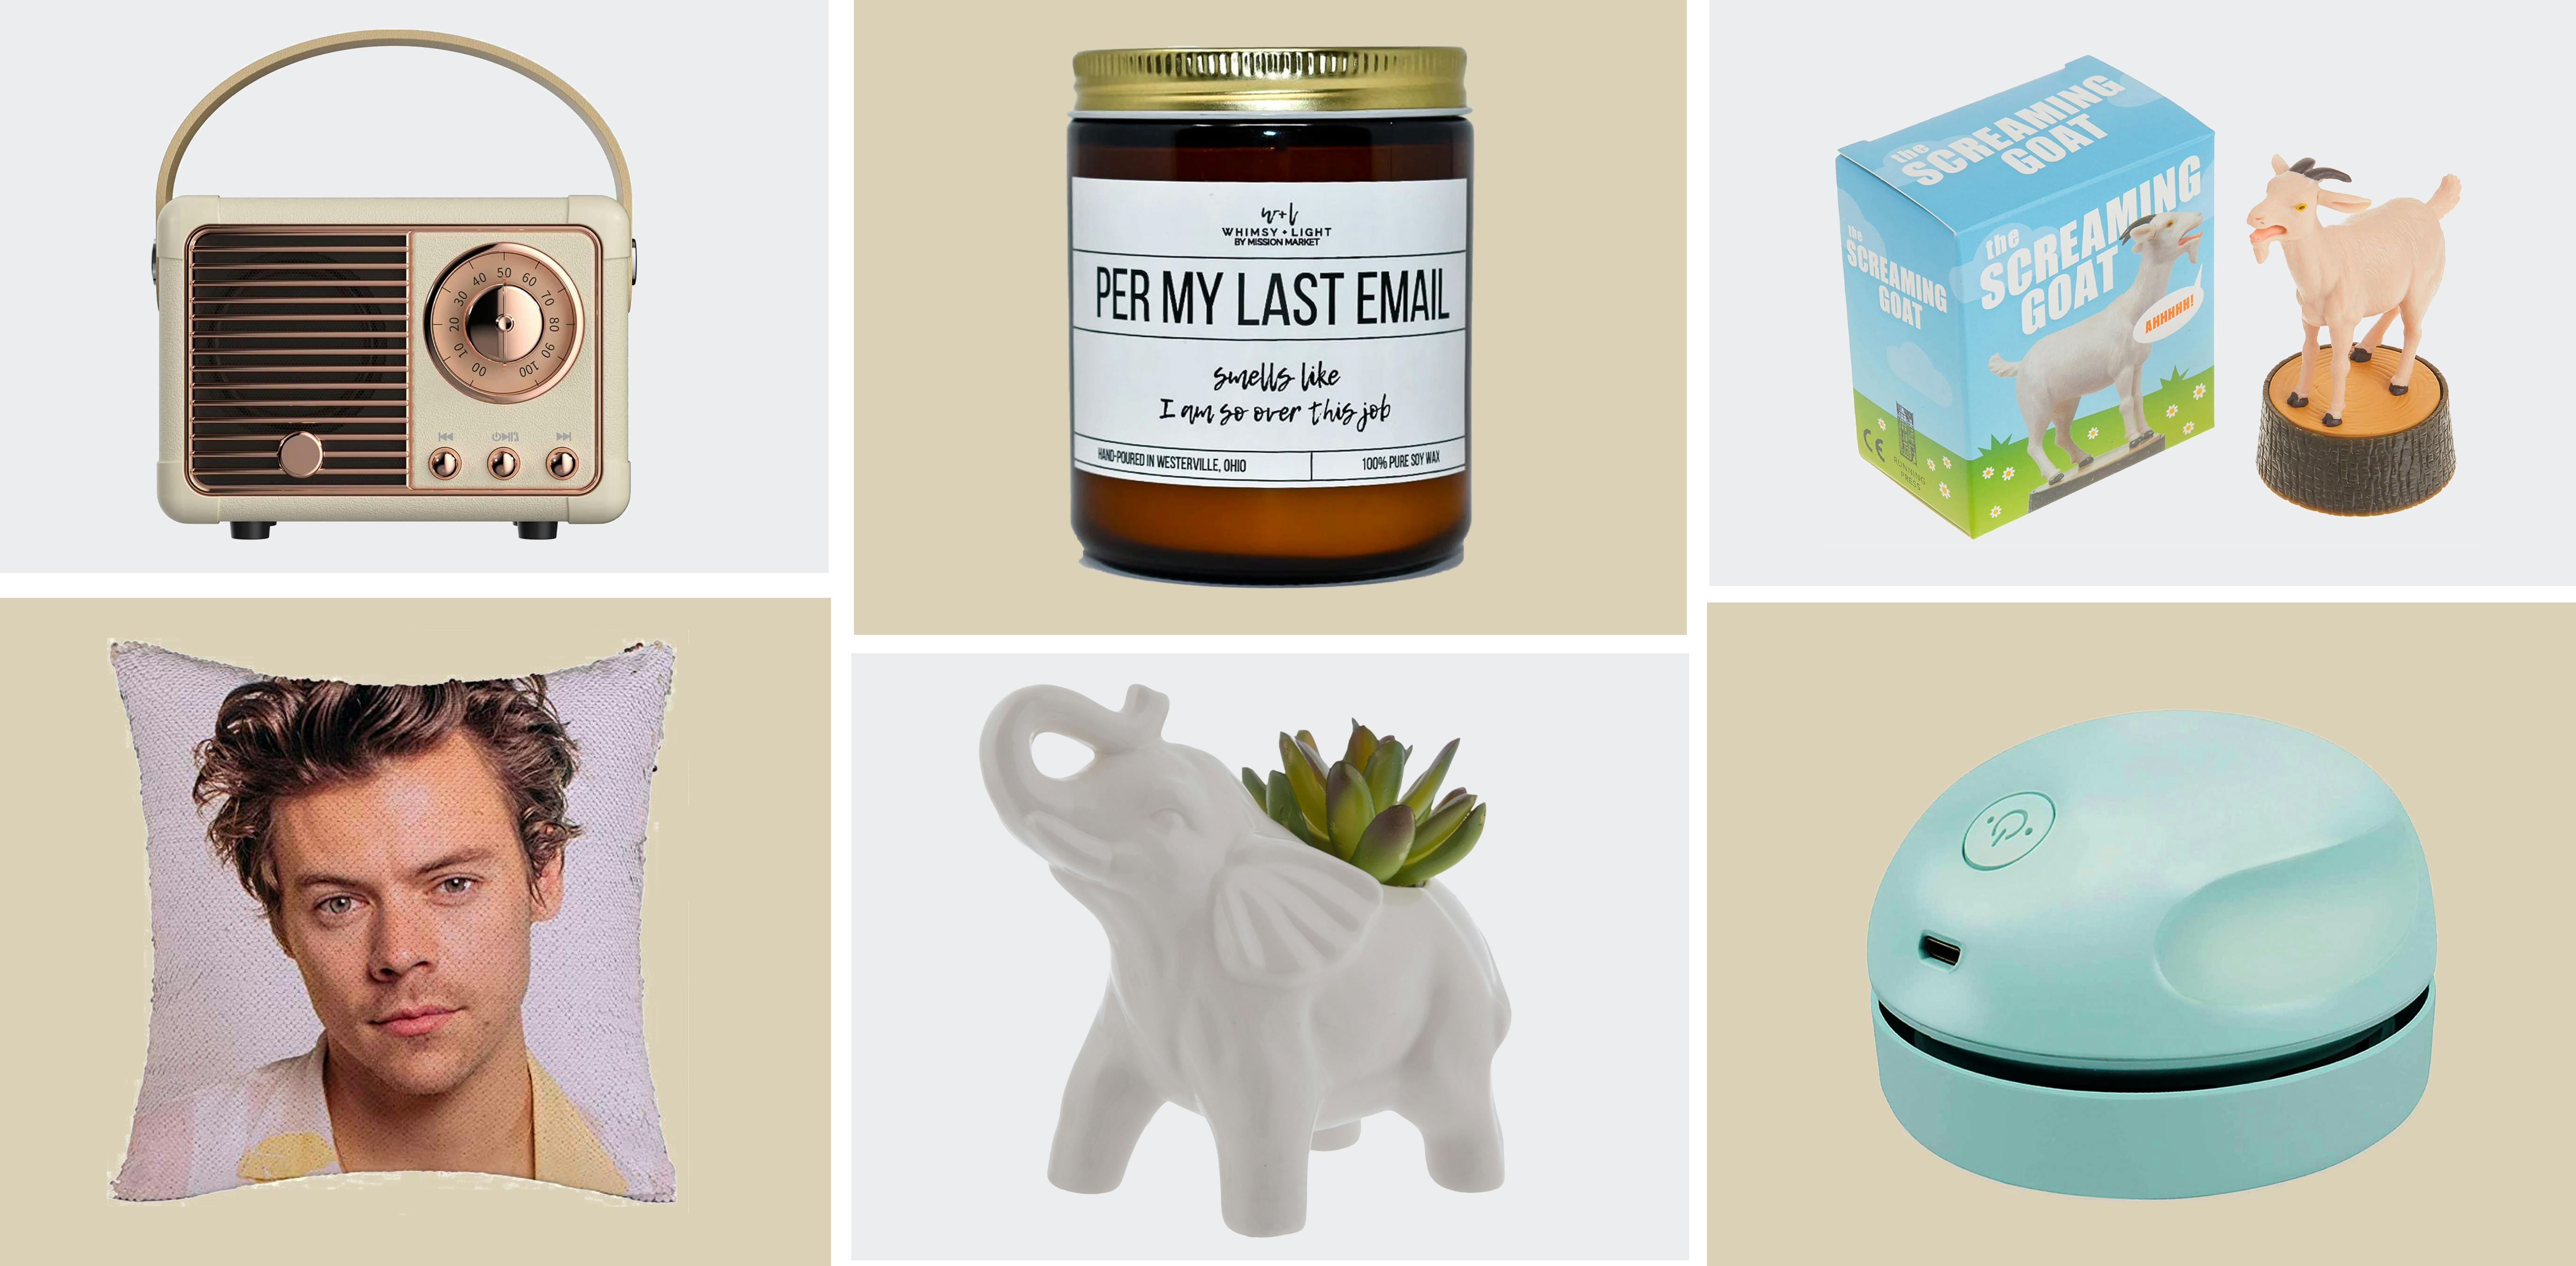 white elephant gift ideas - The Soltrop Six  White elephant gifts, Elephant  gifts, White elephant gifts funny